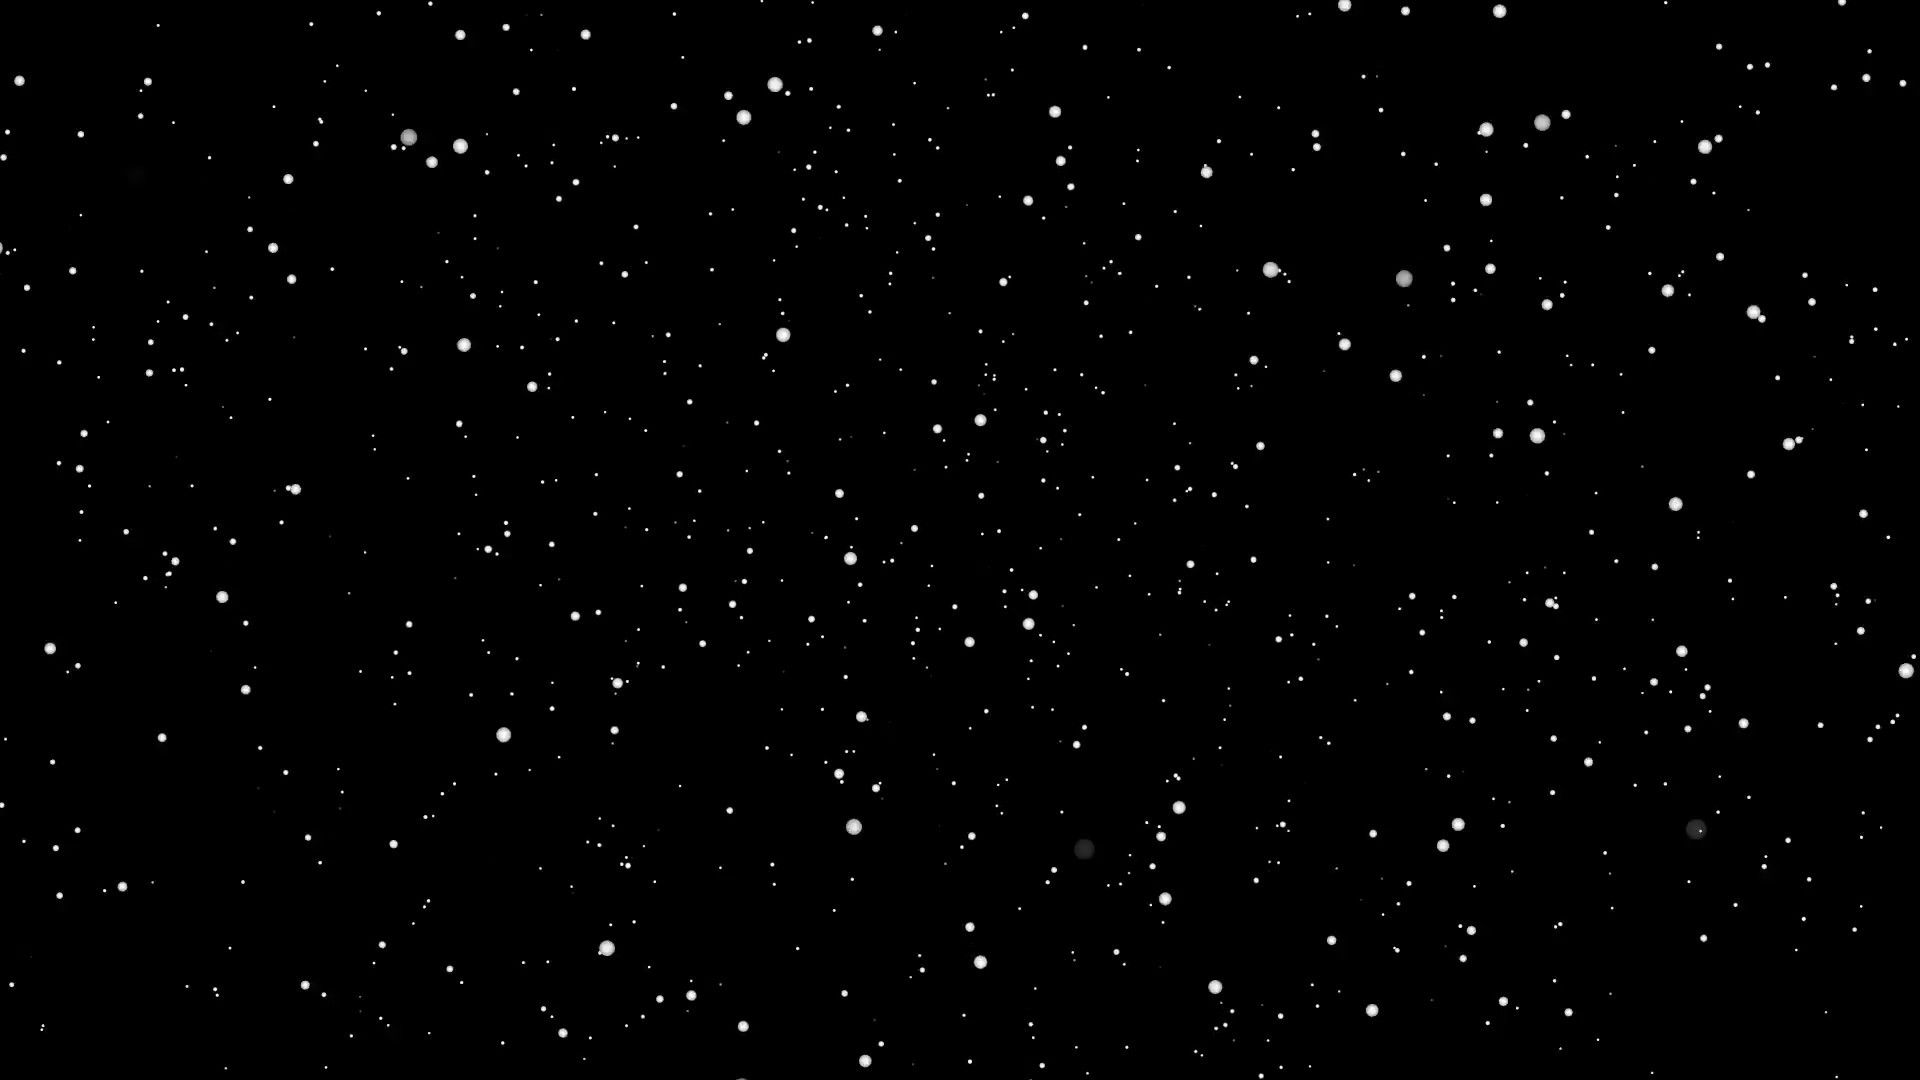 1920x1080 Title : star wars space background (69+ images) Dimension : 1920 x 1080.  File Type : JPG/JPEG